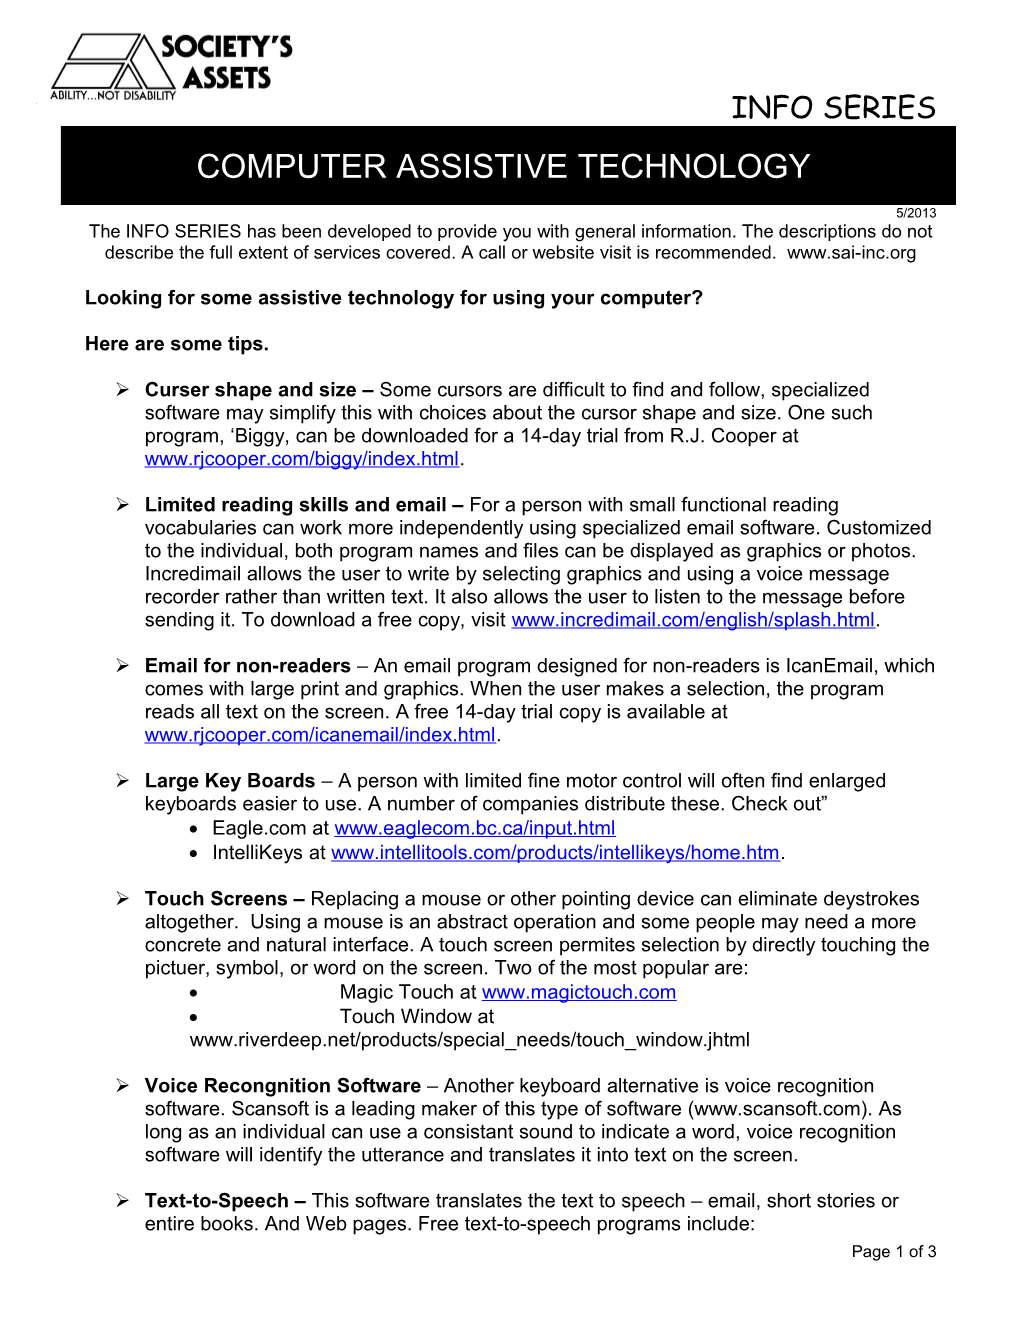 Looking for Some Assistive Technology for Using Your Computer?